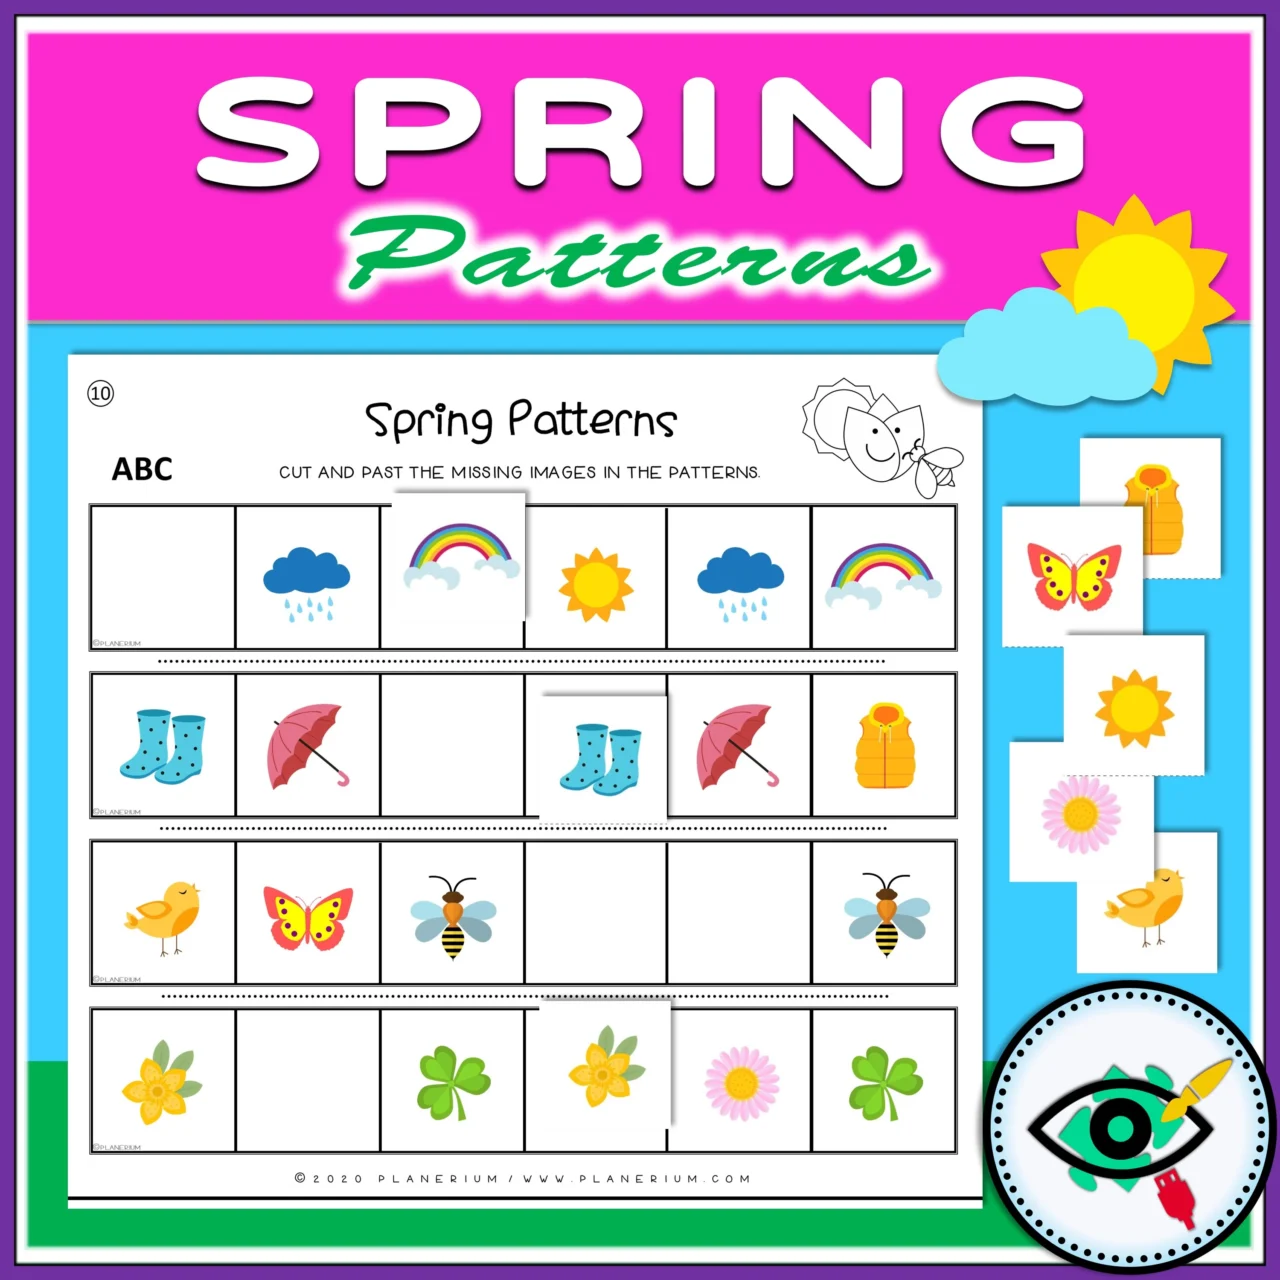 Spring - Patterns Activity - Image Title 7